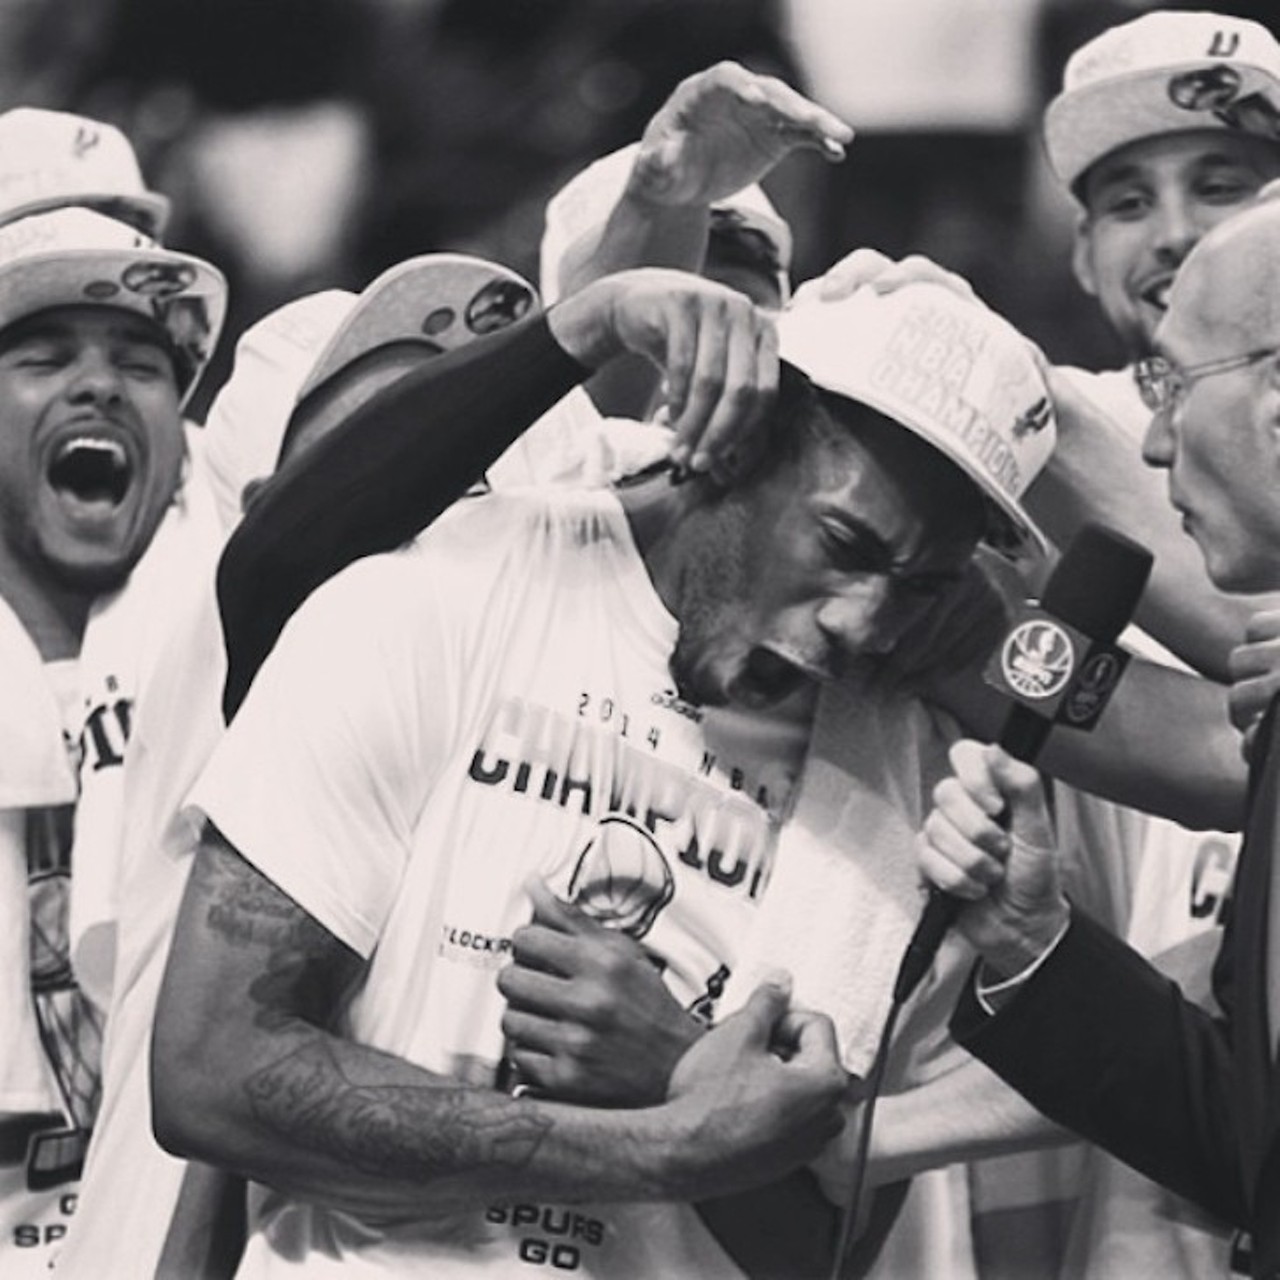 Re-watch a Spurs championship game just to feel joy again. 
Photo via Instagram (carxline__)